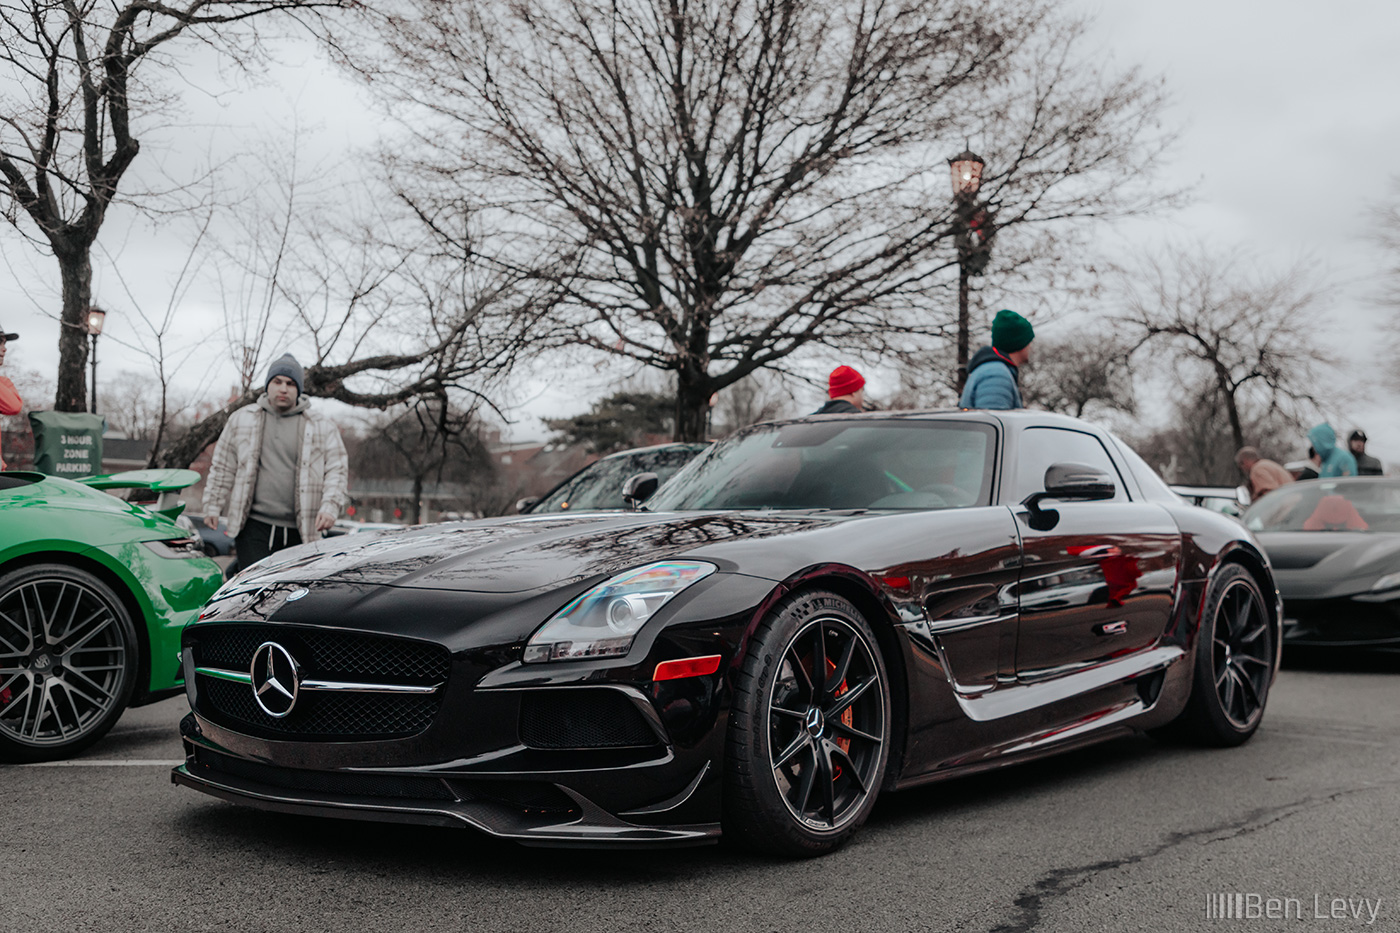 Black Mercedes-Benz SLS AMG Black Series at Toy Drive in Hinsdale